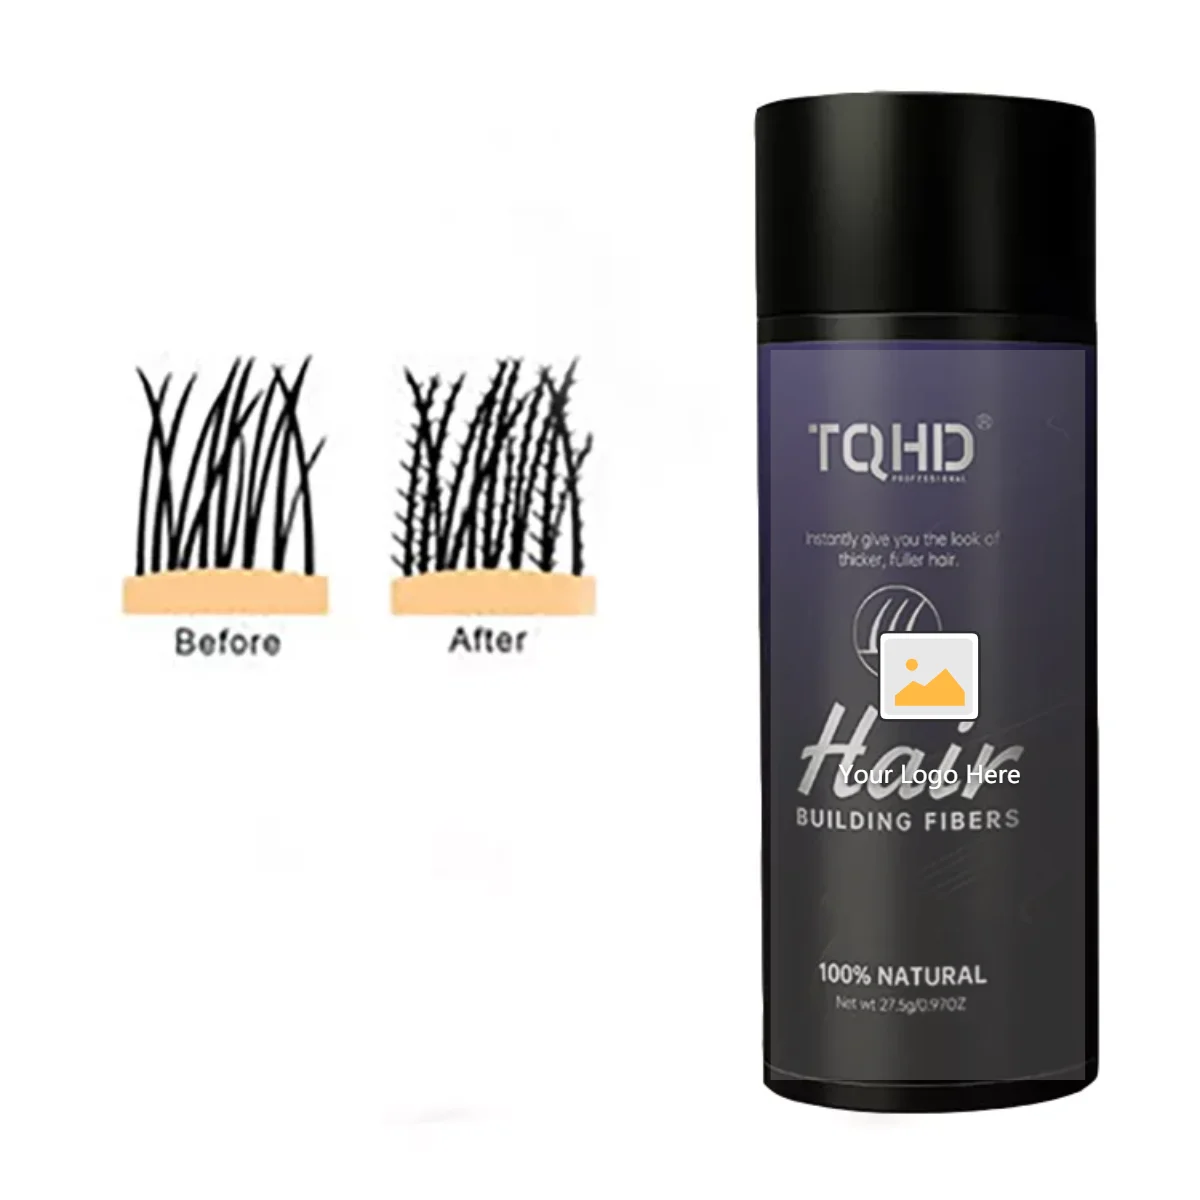 Oem Odm Wholesale High Tech Qualityity Organic Dense Boldify Rebuild Hair  Fiber Spray Powder Packs Thick Your Hair - Buy Factory Price Hair Building  Fiber For Hair Loss Product,Instantly Hair Building Fiber,Thickening